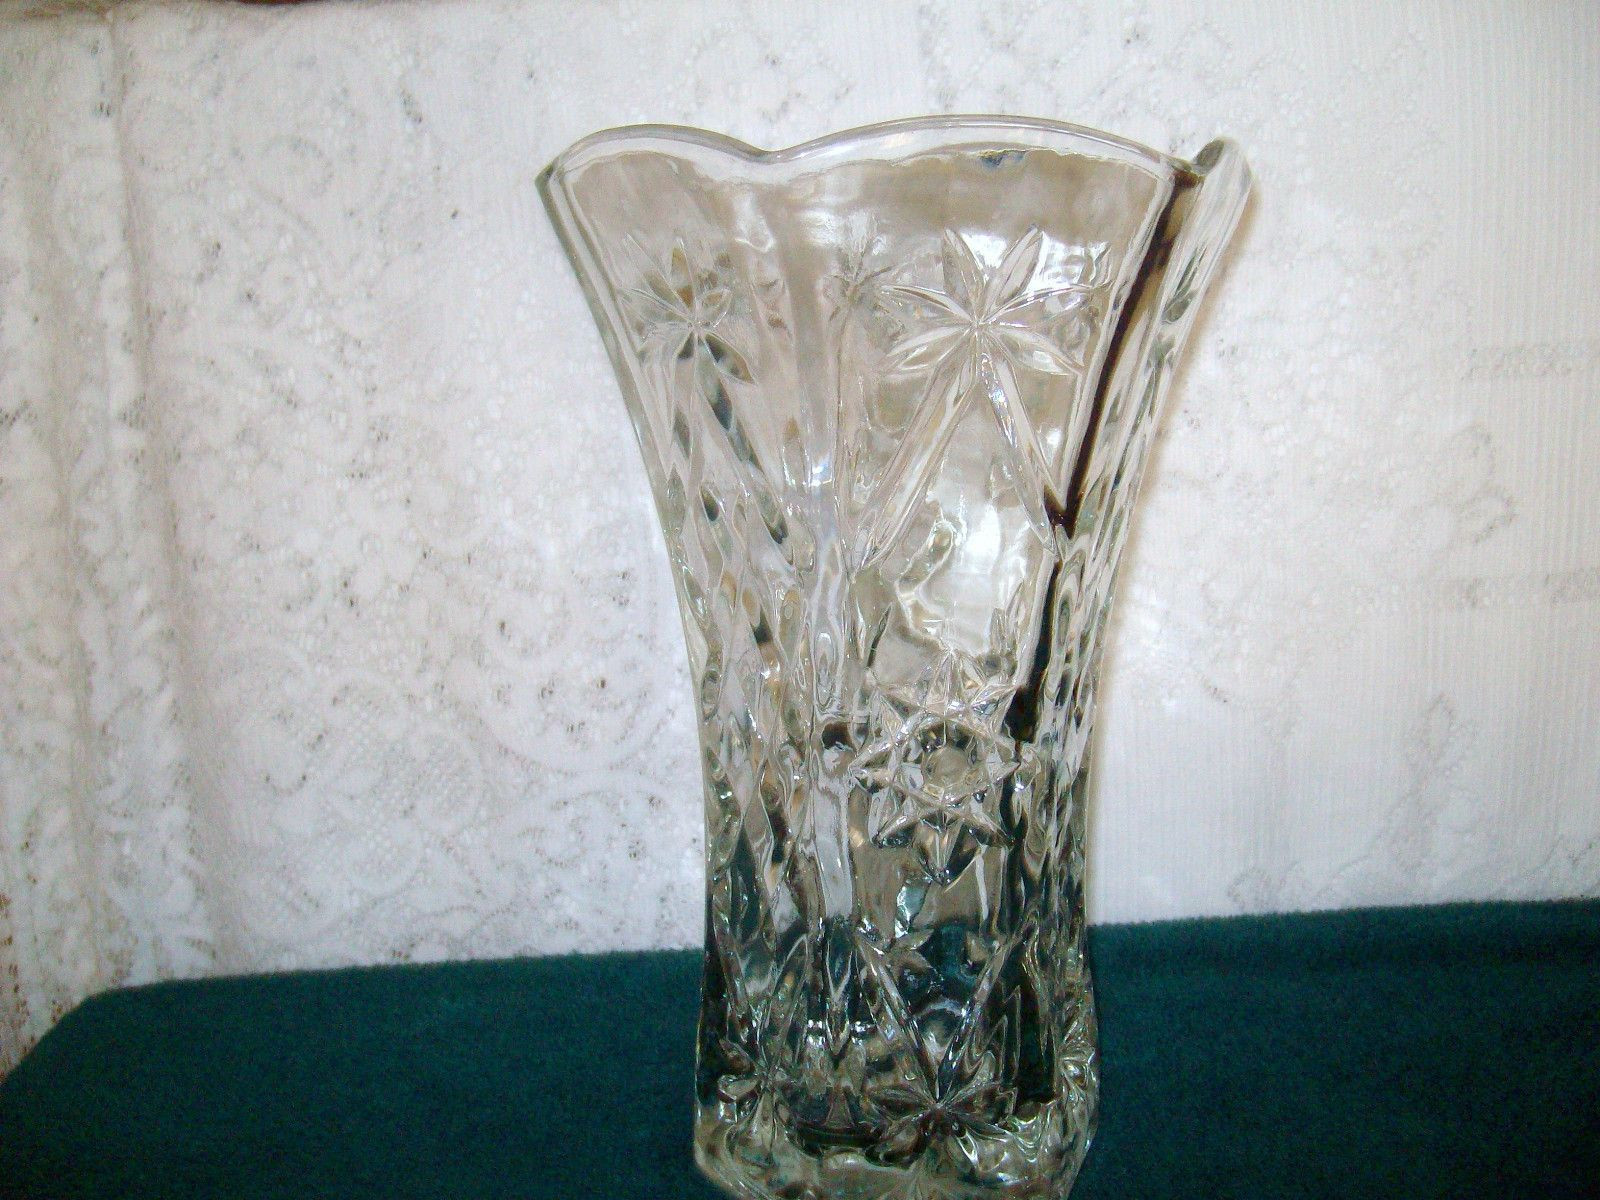 21 Famous Clear Cut Glass Vase 2024 free download clear cut glass vase of vintage heavy depression cut glass vase 10 1 2 tall ruffled edges regarding vintage heavy depression cut glass vase 10 1 2 tall ruffled edges